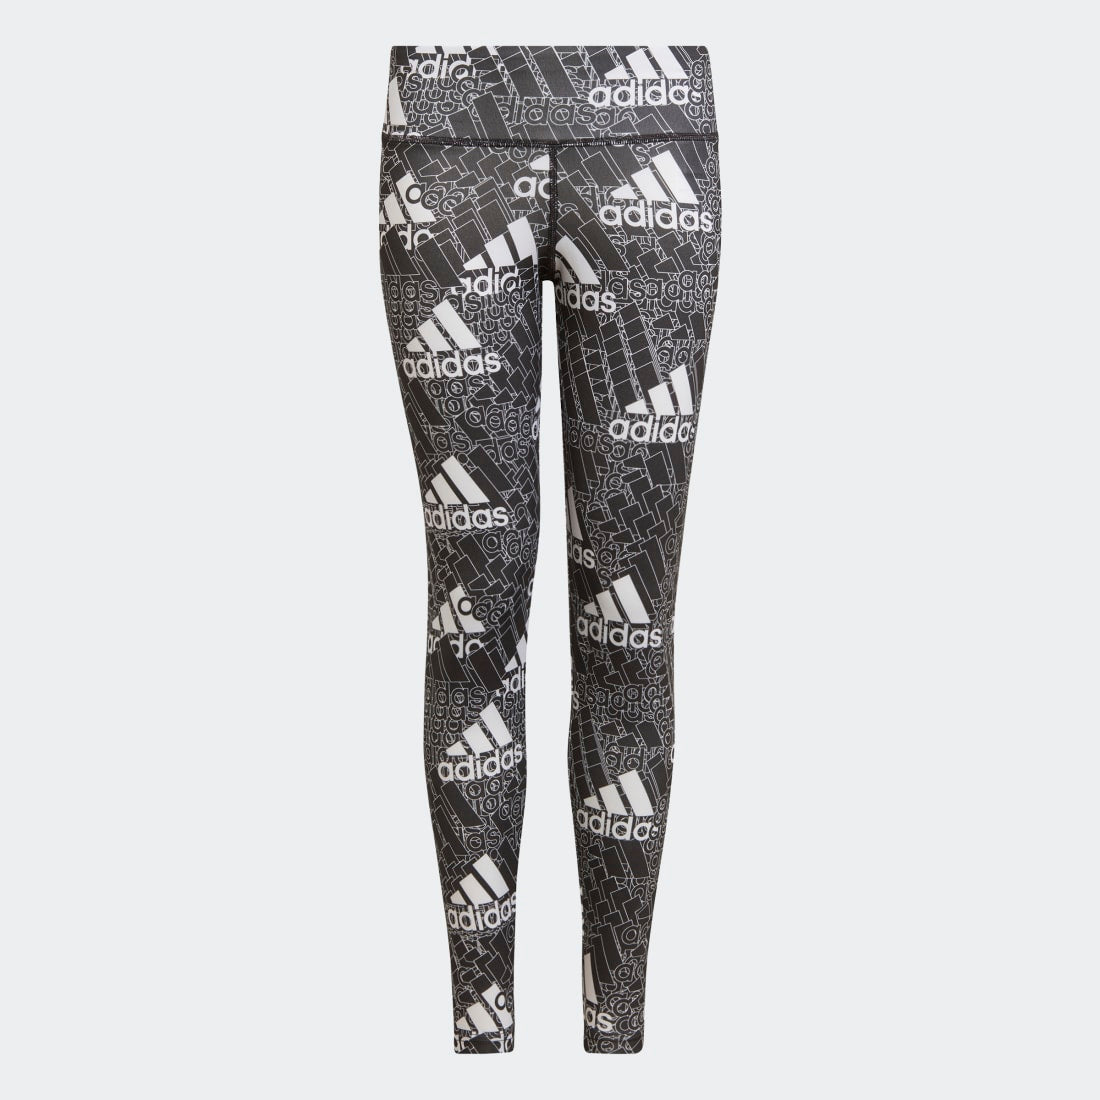 Awesome Adidas Legging Outfits Ideas to Steal - Fancy Ideas about  Hairstyles, Nails, Outfits, and Everything | Outfits with leggings, Cute  outfits, Sporty outfits